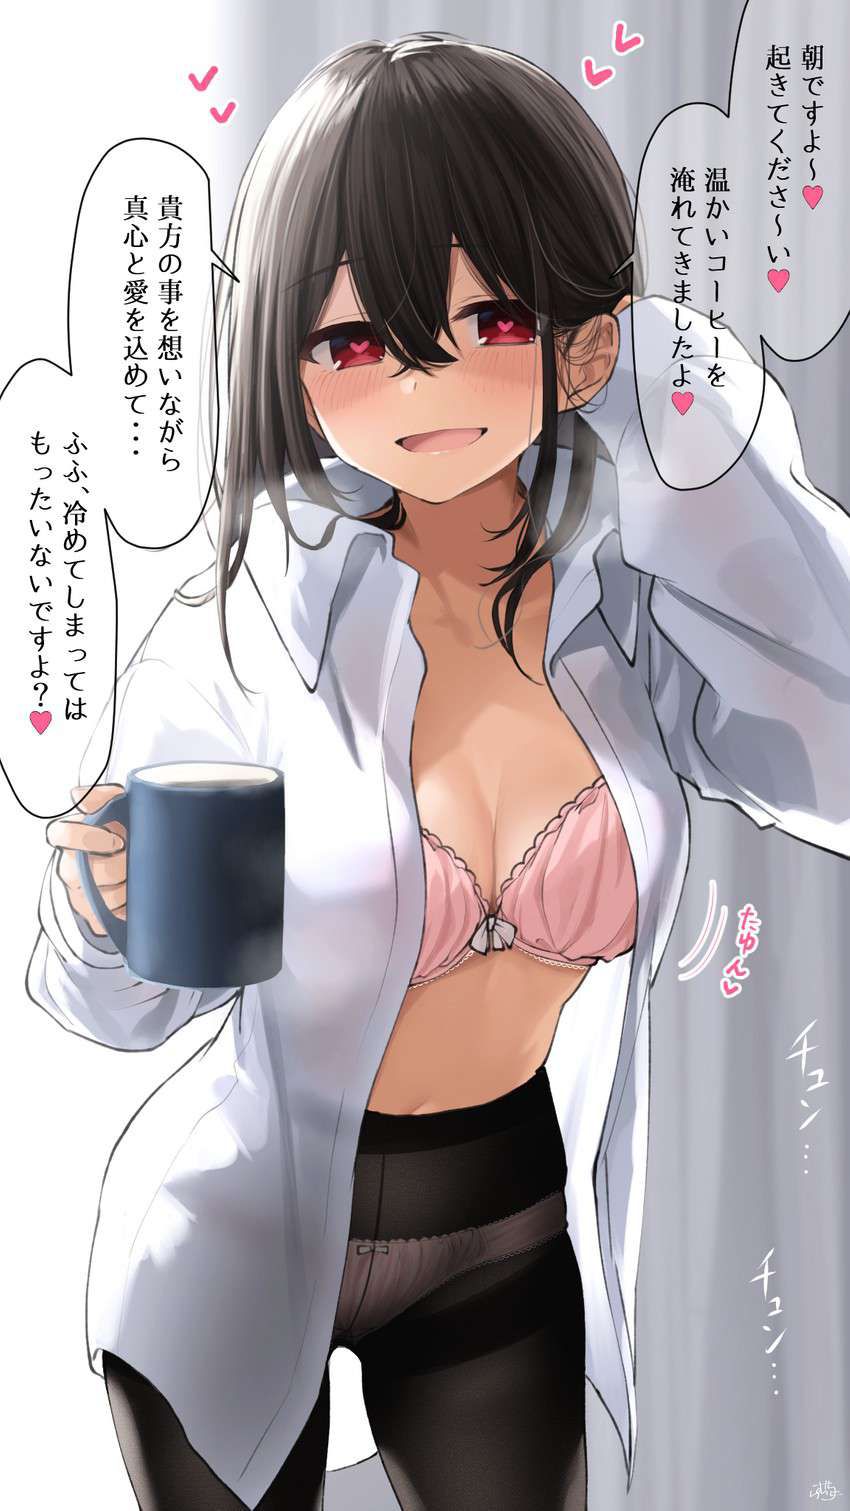 【Morning after the day】Secondary erotic image of a girl who has a coffee cup 1